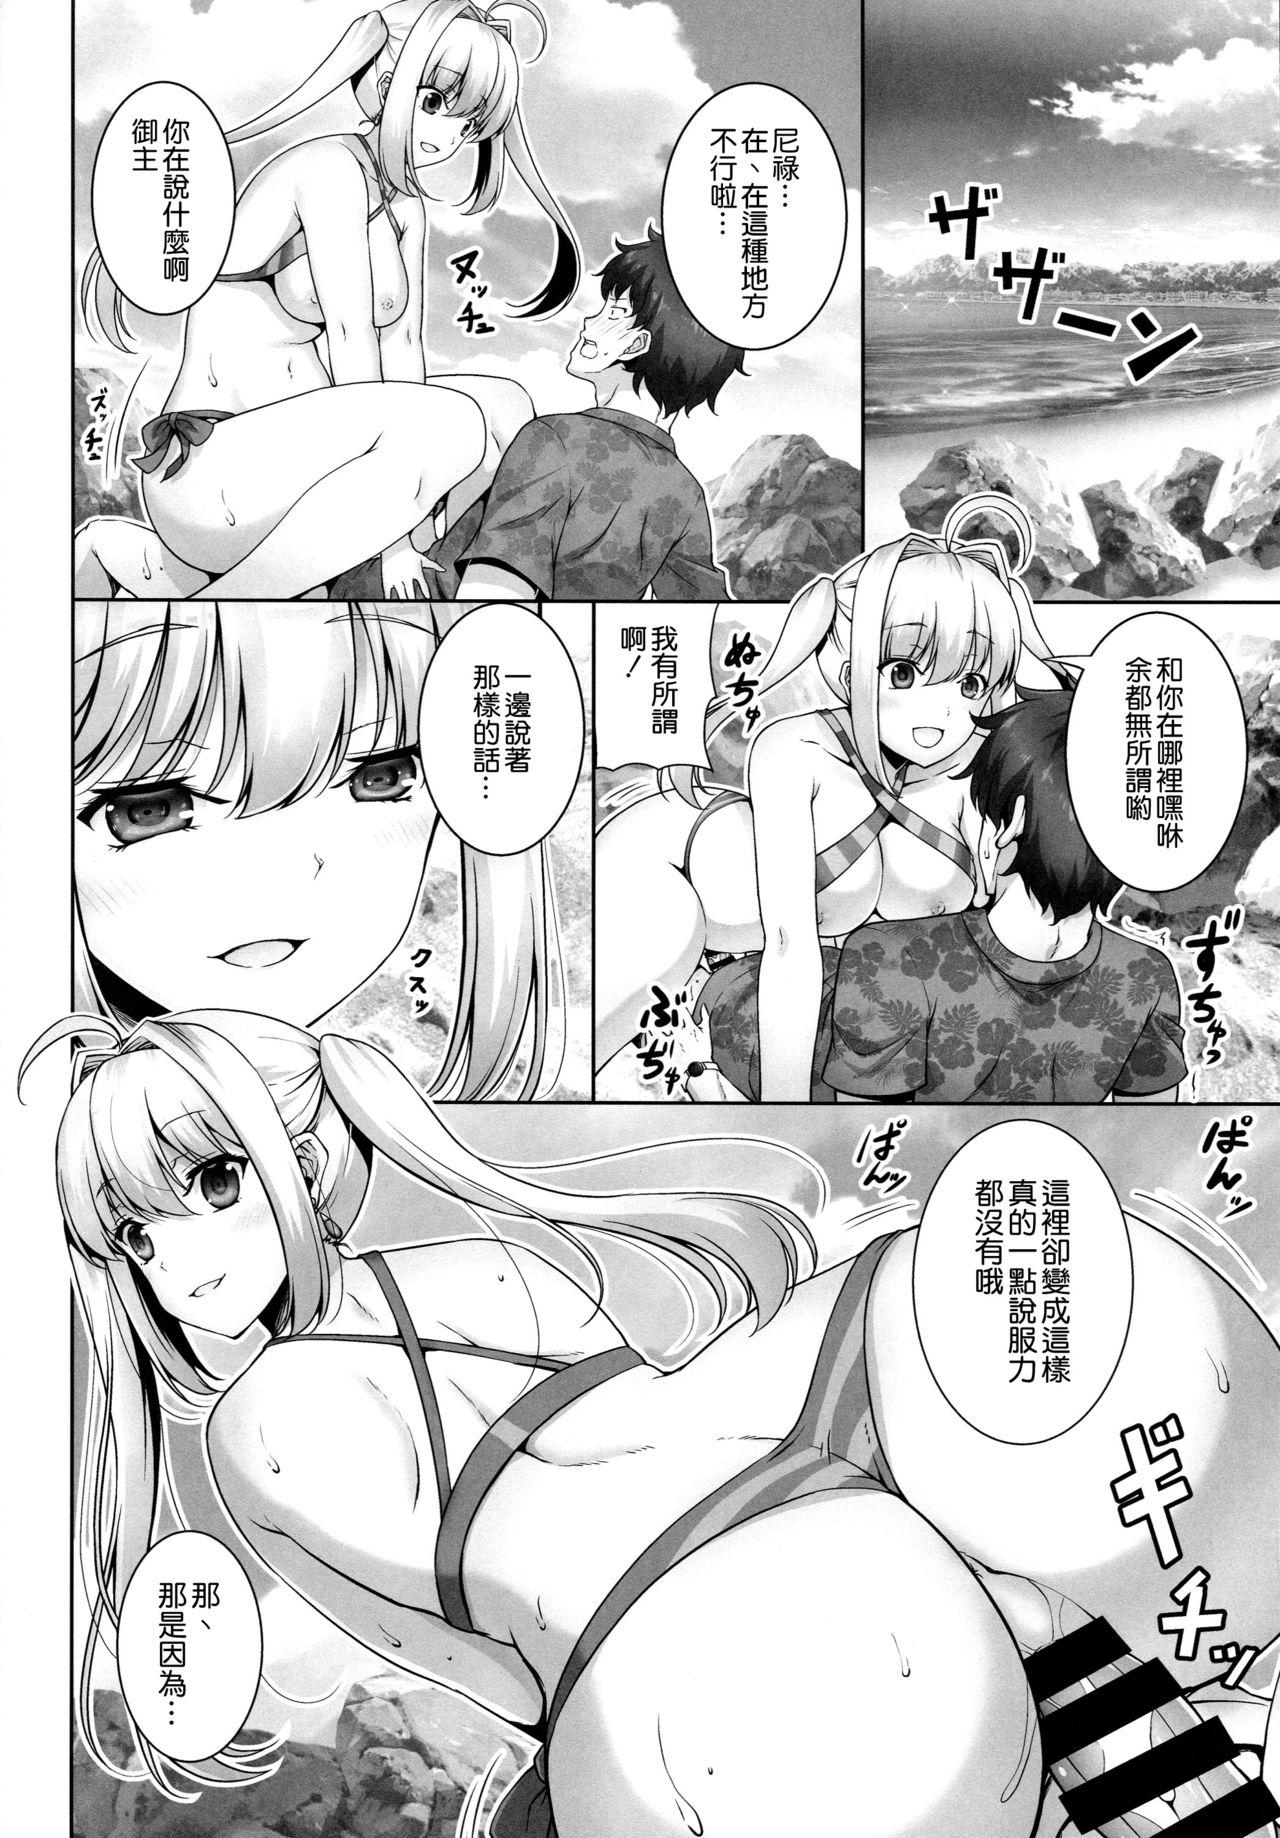 Perfect Porn SEX ON THE BEACH!! - Fate grand order Friends - Page 6